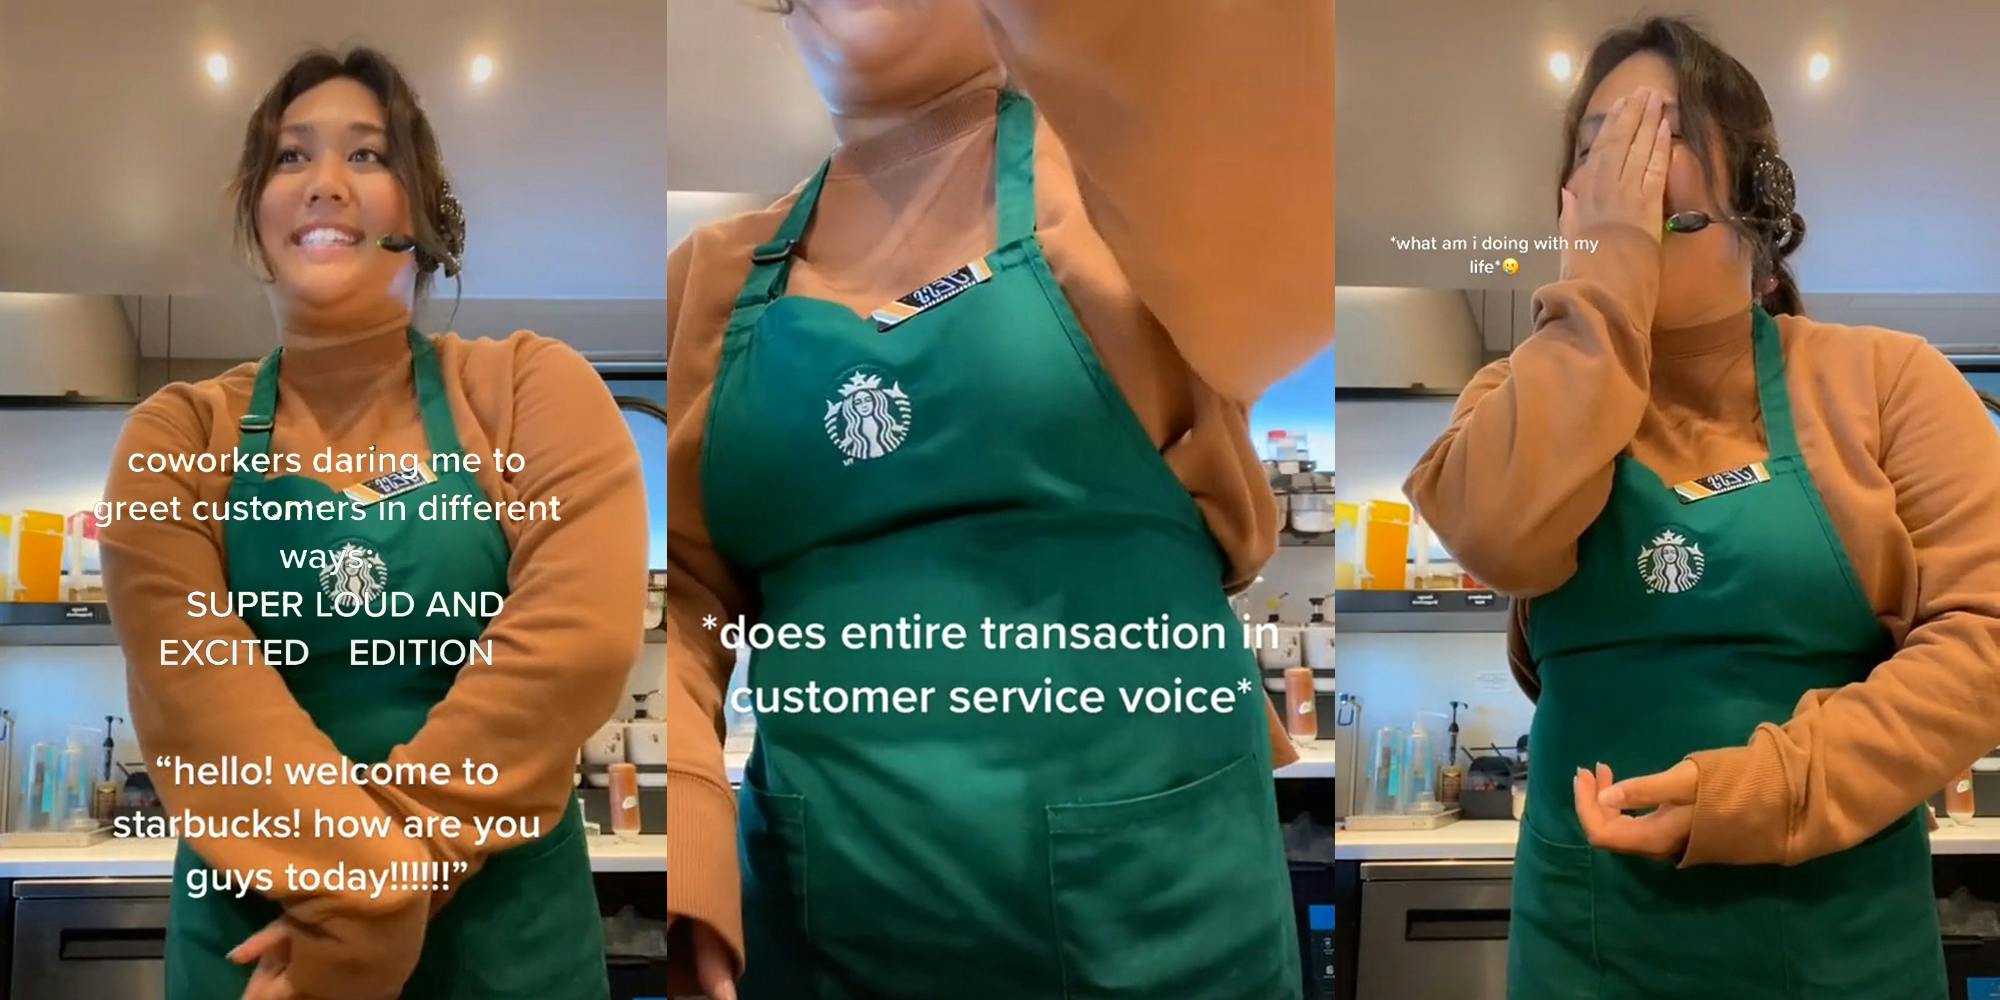 Starbucks worker speaking into headset taking order smiling hands together caption "coworkers daring me to greet customers in different ways: SUPER LOUD AND EXCITED EDITION "hello! welcome to starbucks! how are you guys today!!!!!" (l) Starbucks employee completing order transaction caption "*in customer service voice*" (c) Starbucks employee speaking into headset taking order hand on face laughing caption "*what am I doing with my life*" (r)